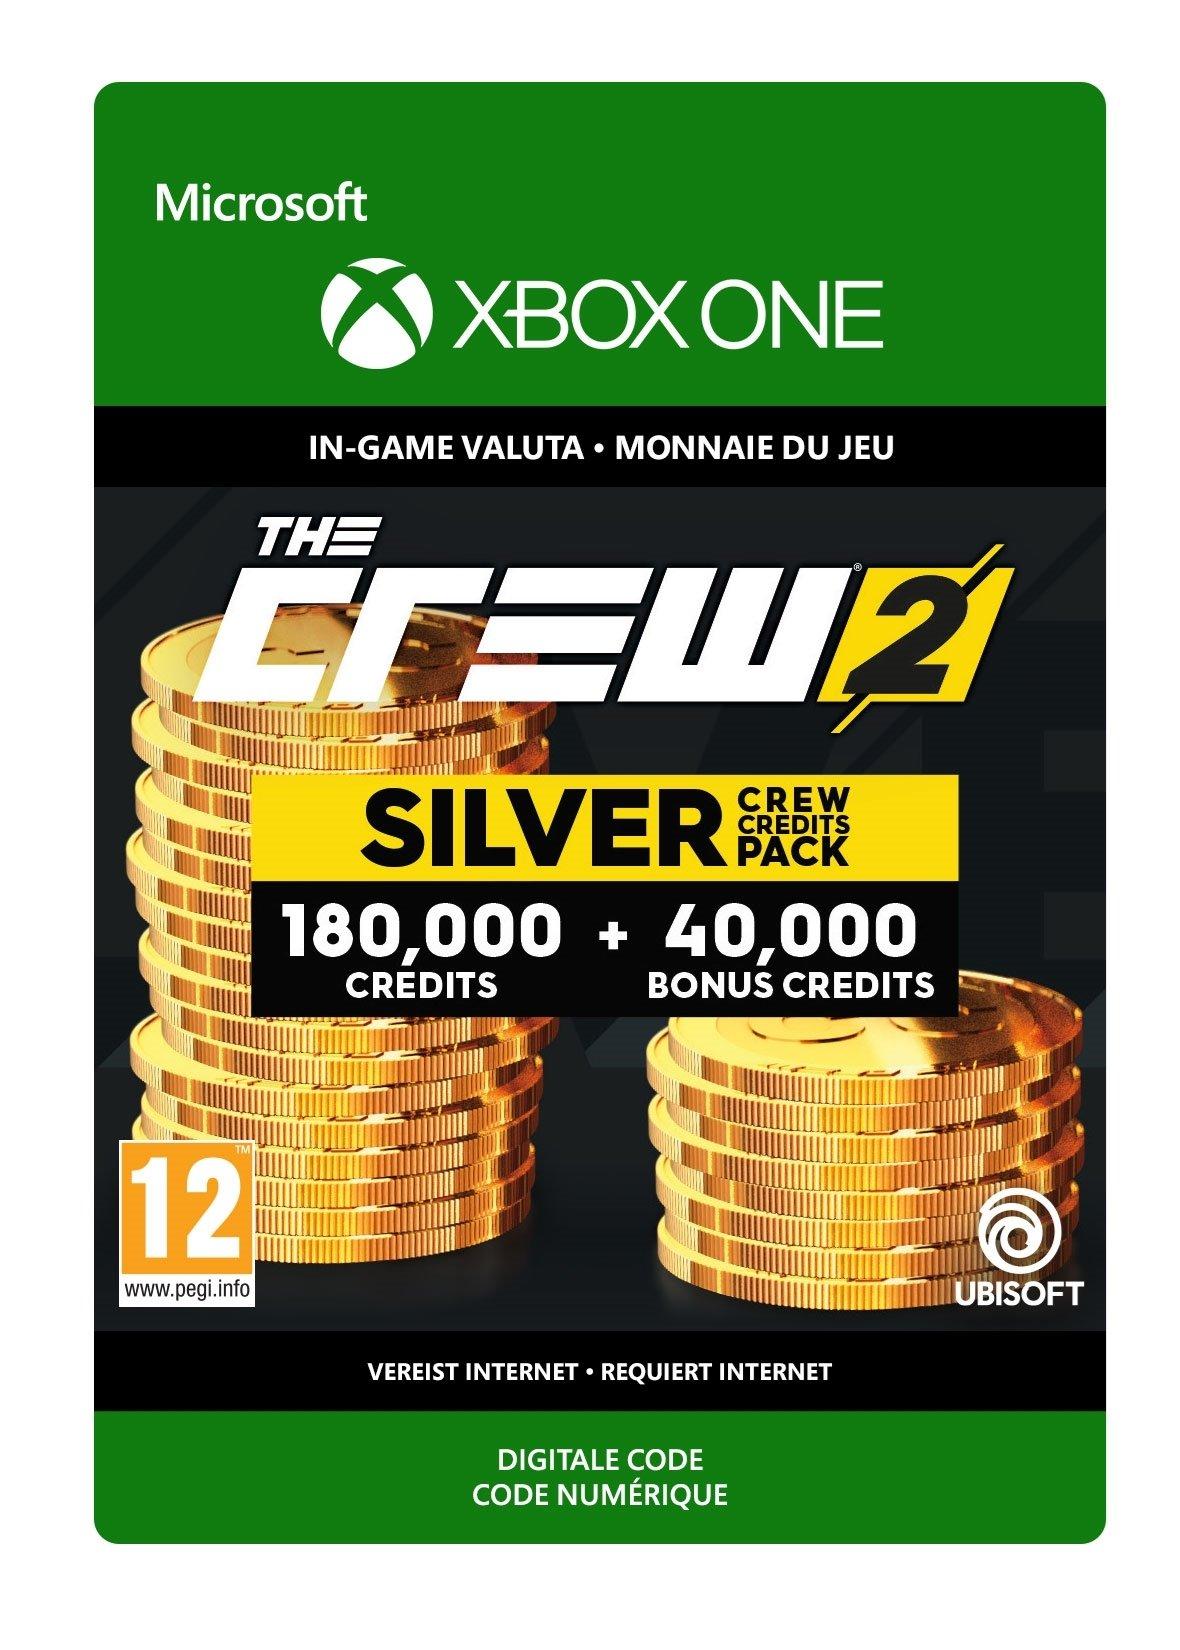 The Crew 2 Silver Crew Credit Pack - Xbox One - Consumable | 7F6-00182 (e9f97613-6fa7-9149-aad9-1288397d43ae)